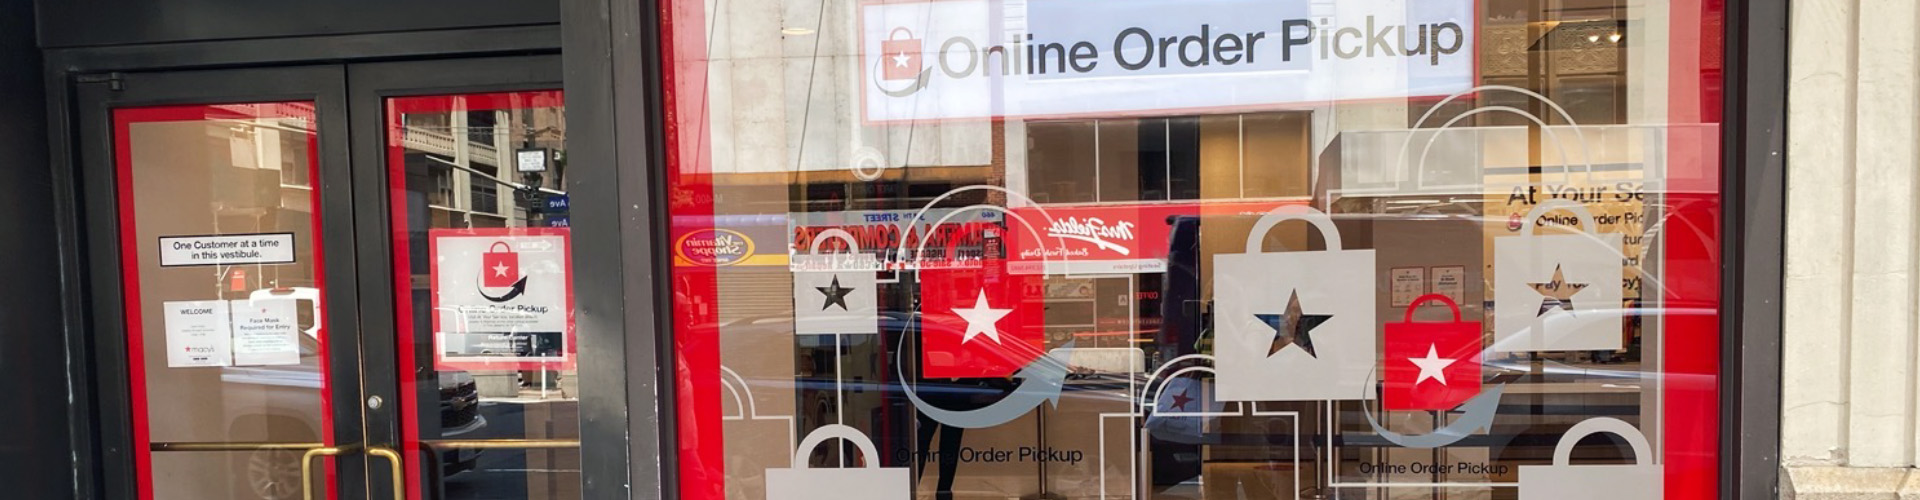 Reopened Retail Part 4: NYC – Report Banner featuring online order pickup window at Macys